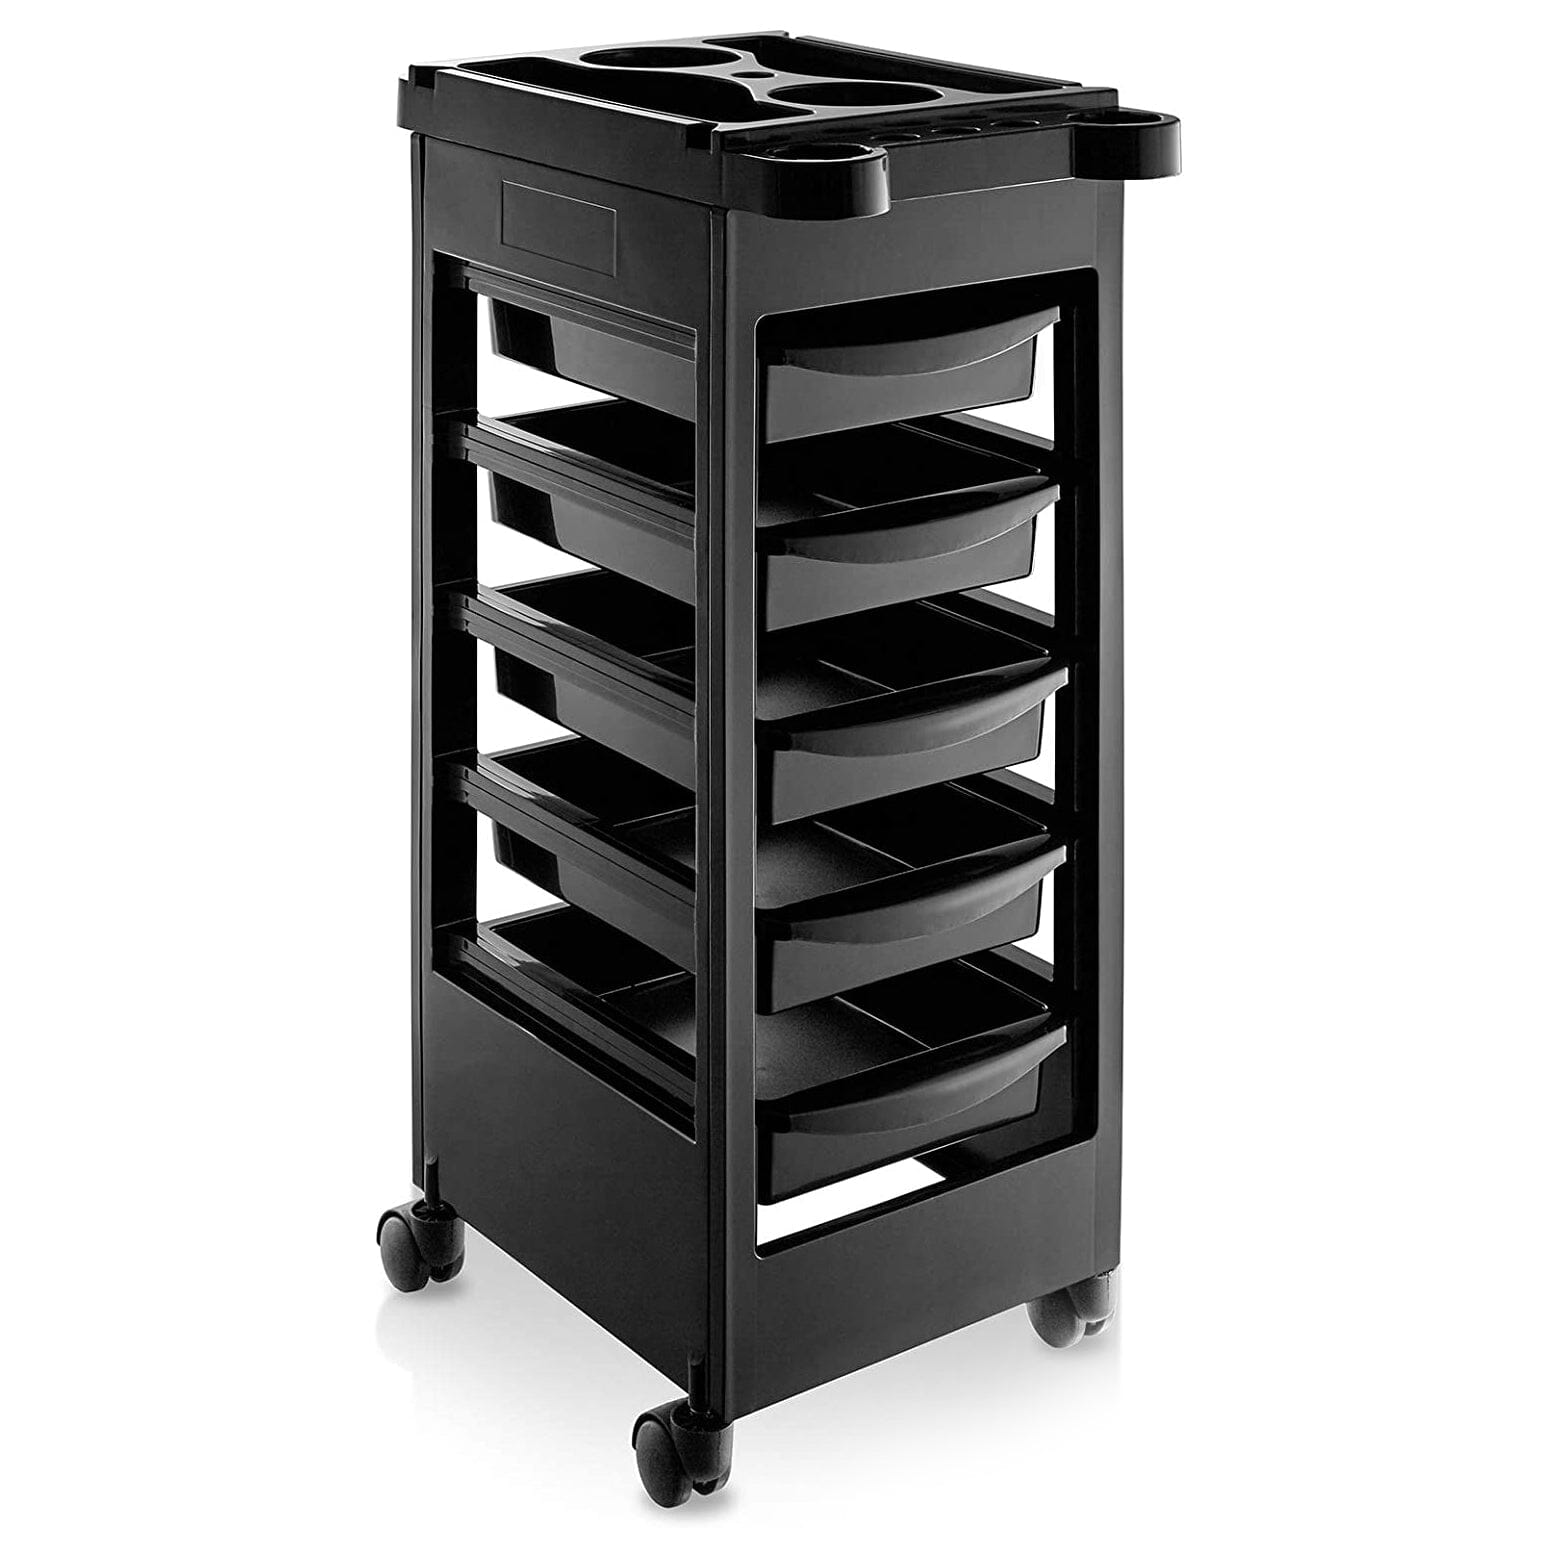 DK-38015 | Trolley Cart with 5 Drawers TROLLEY SSW 